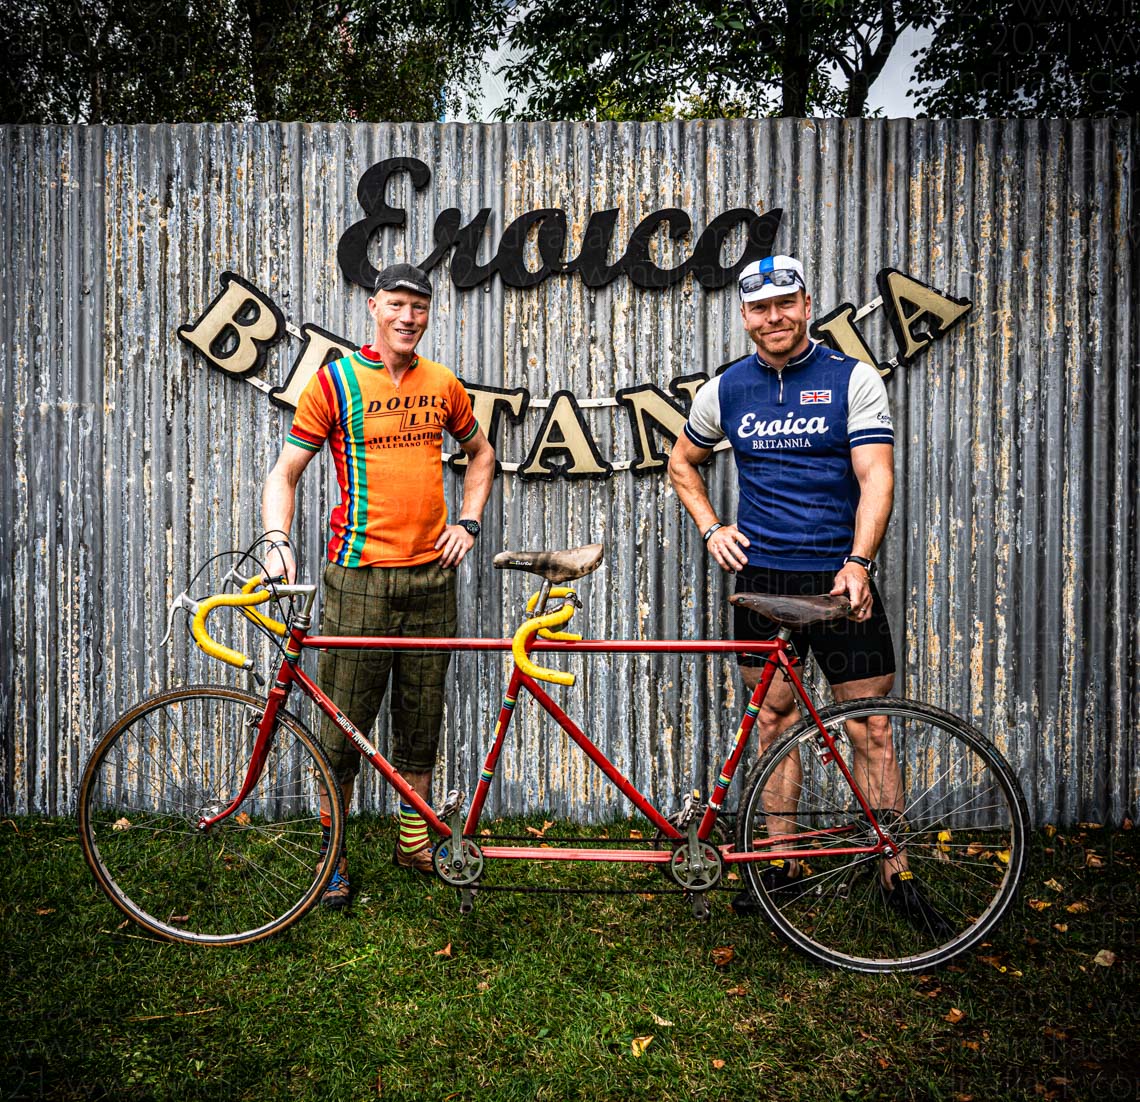 Eroica Britannia Vintage Tandem with Sir Chris Hoy photographed at Goodwood Revival 2021 by Indira Flack portrait photographer